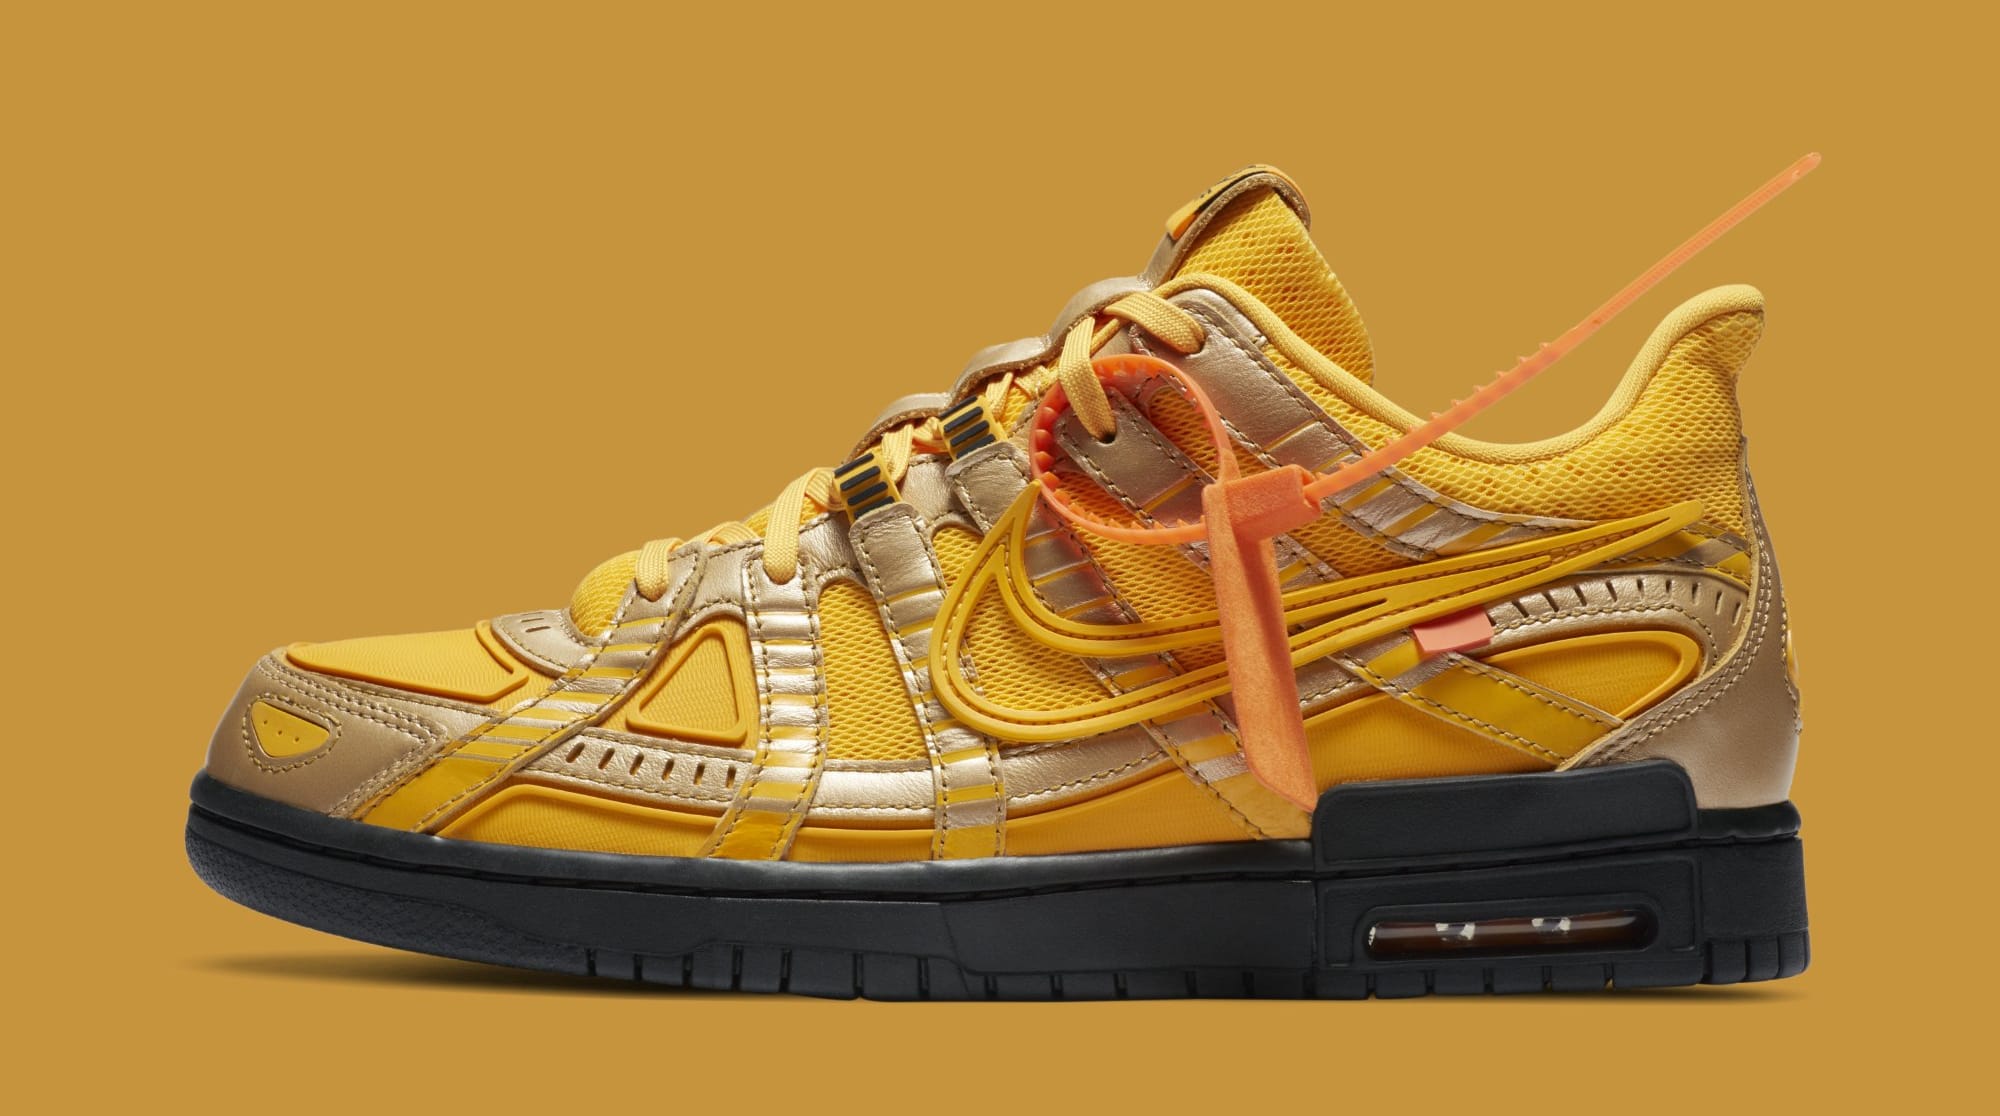 Off-White x Nike Air Rubber Dunk 'University Gold' CU6015-700 Lateral